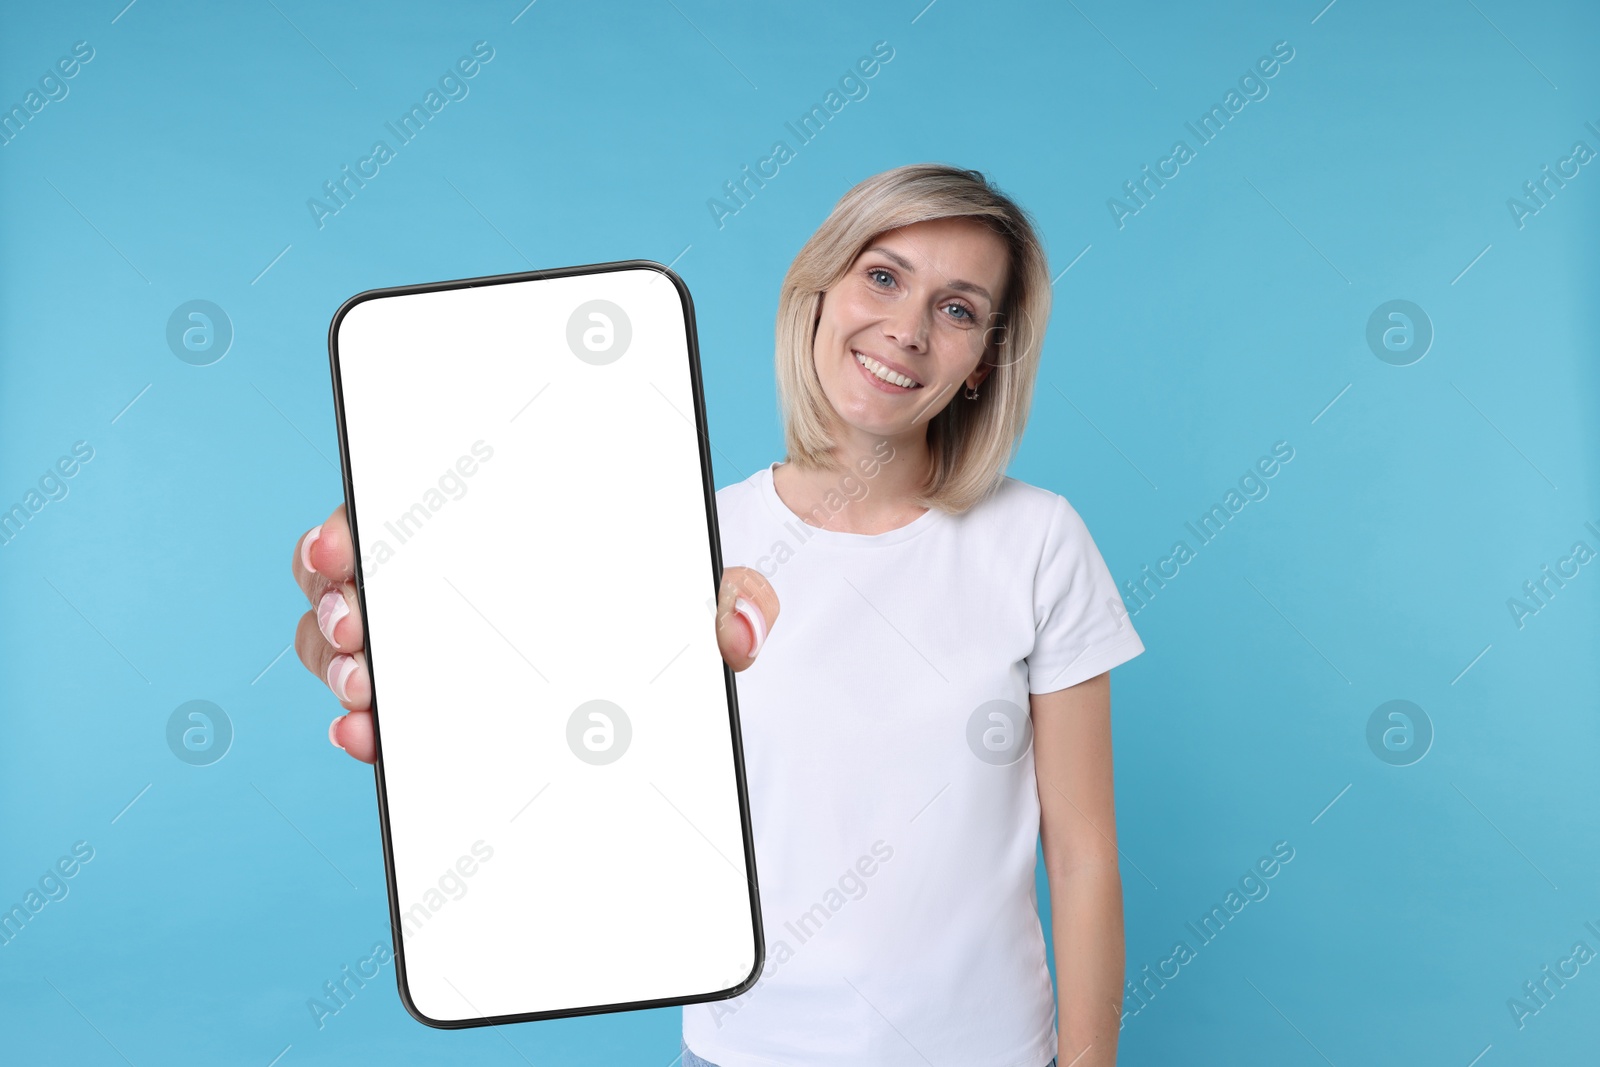 Image of Happy woman showing mobile phone with blank screen on light blue background. Mockup for design